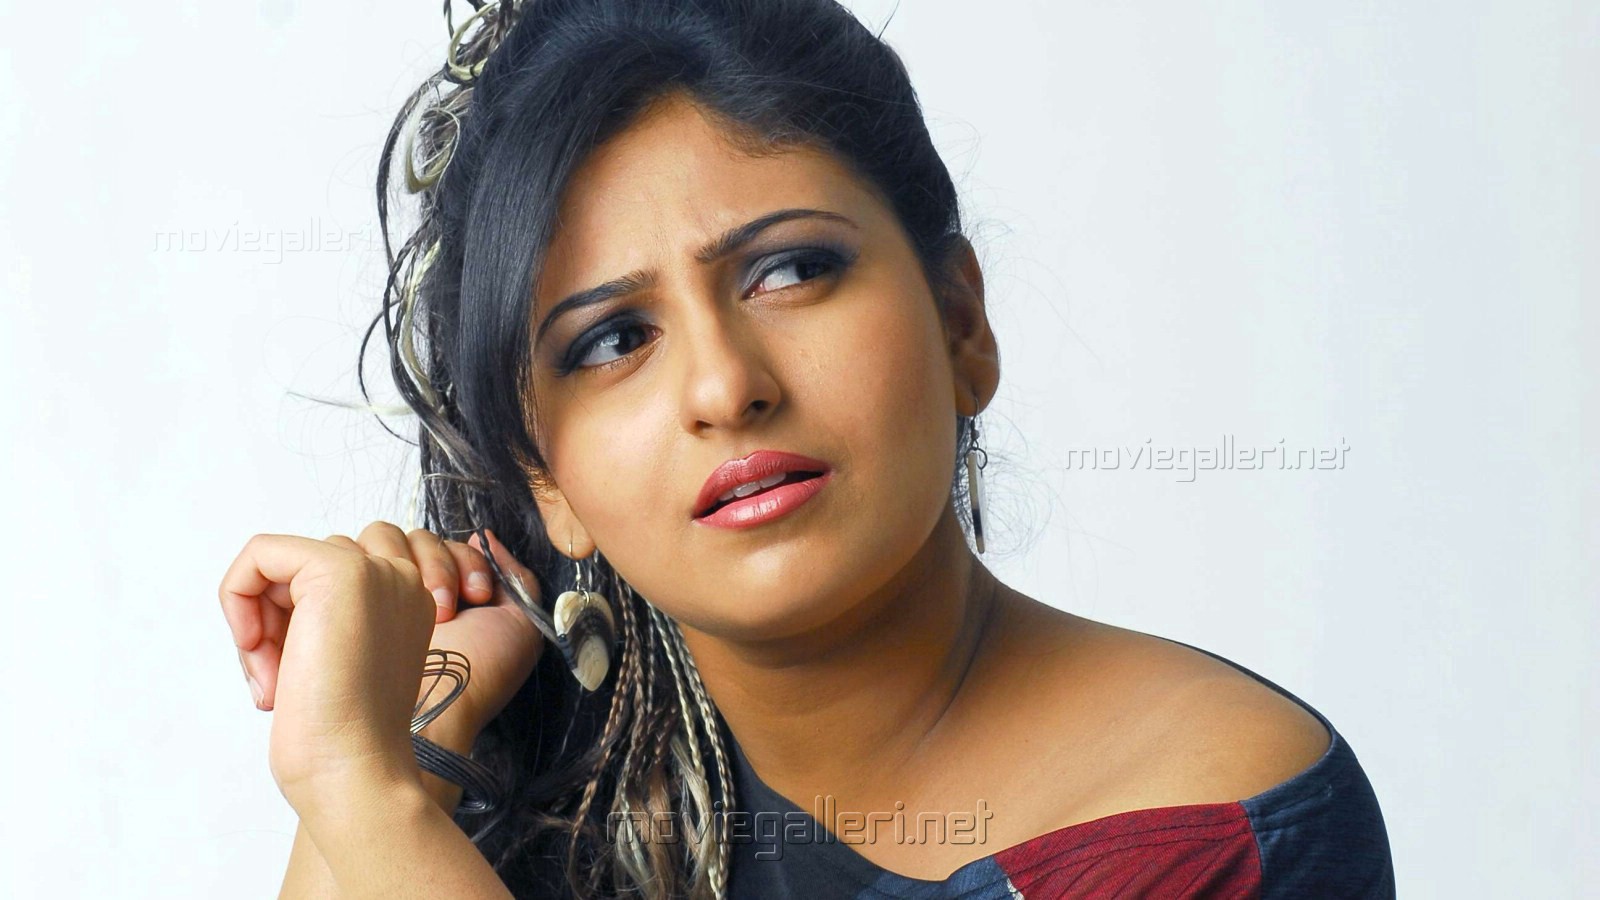 Tamil actresses wallpapers